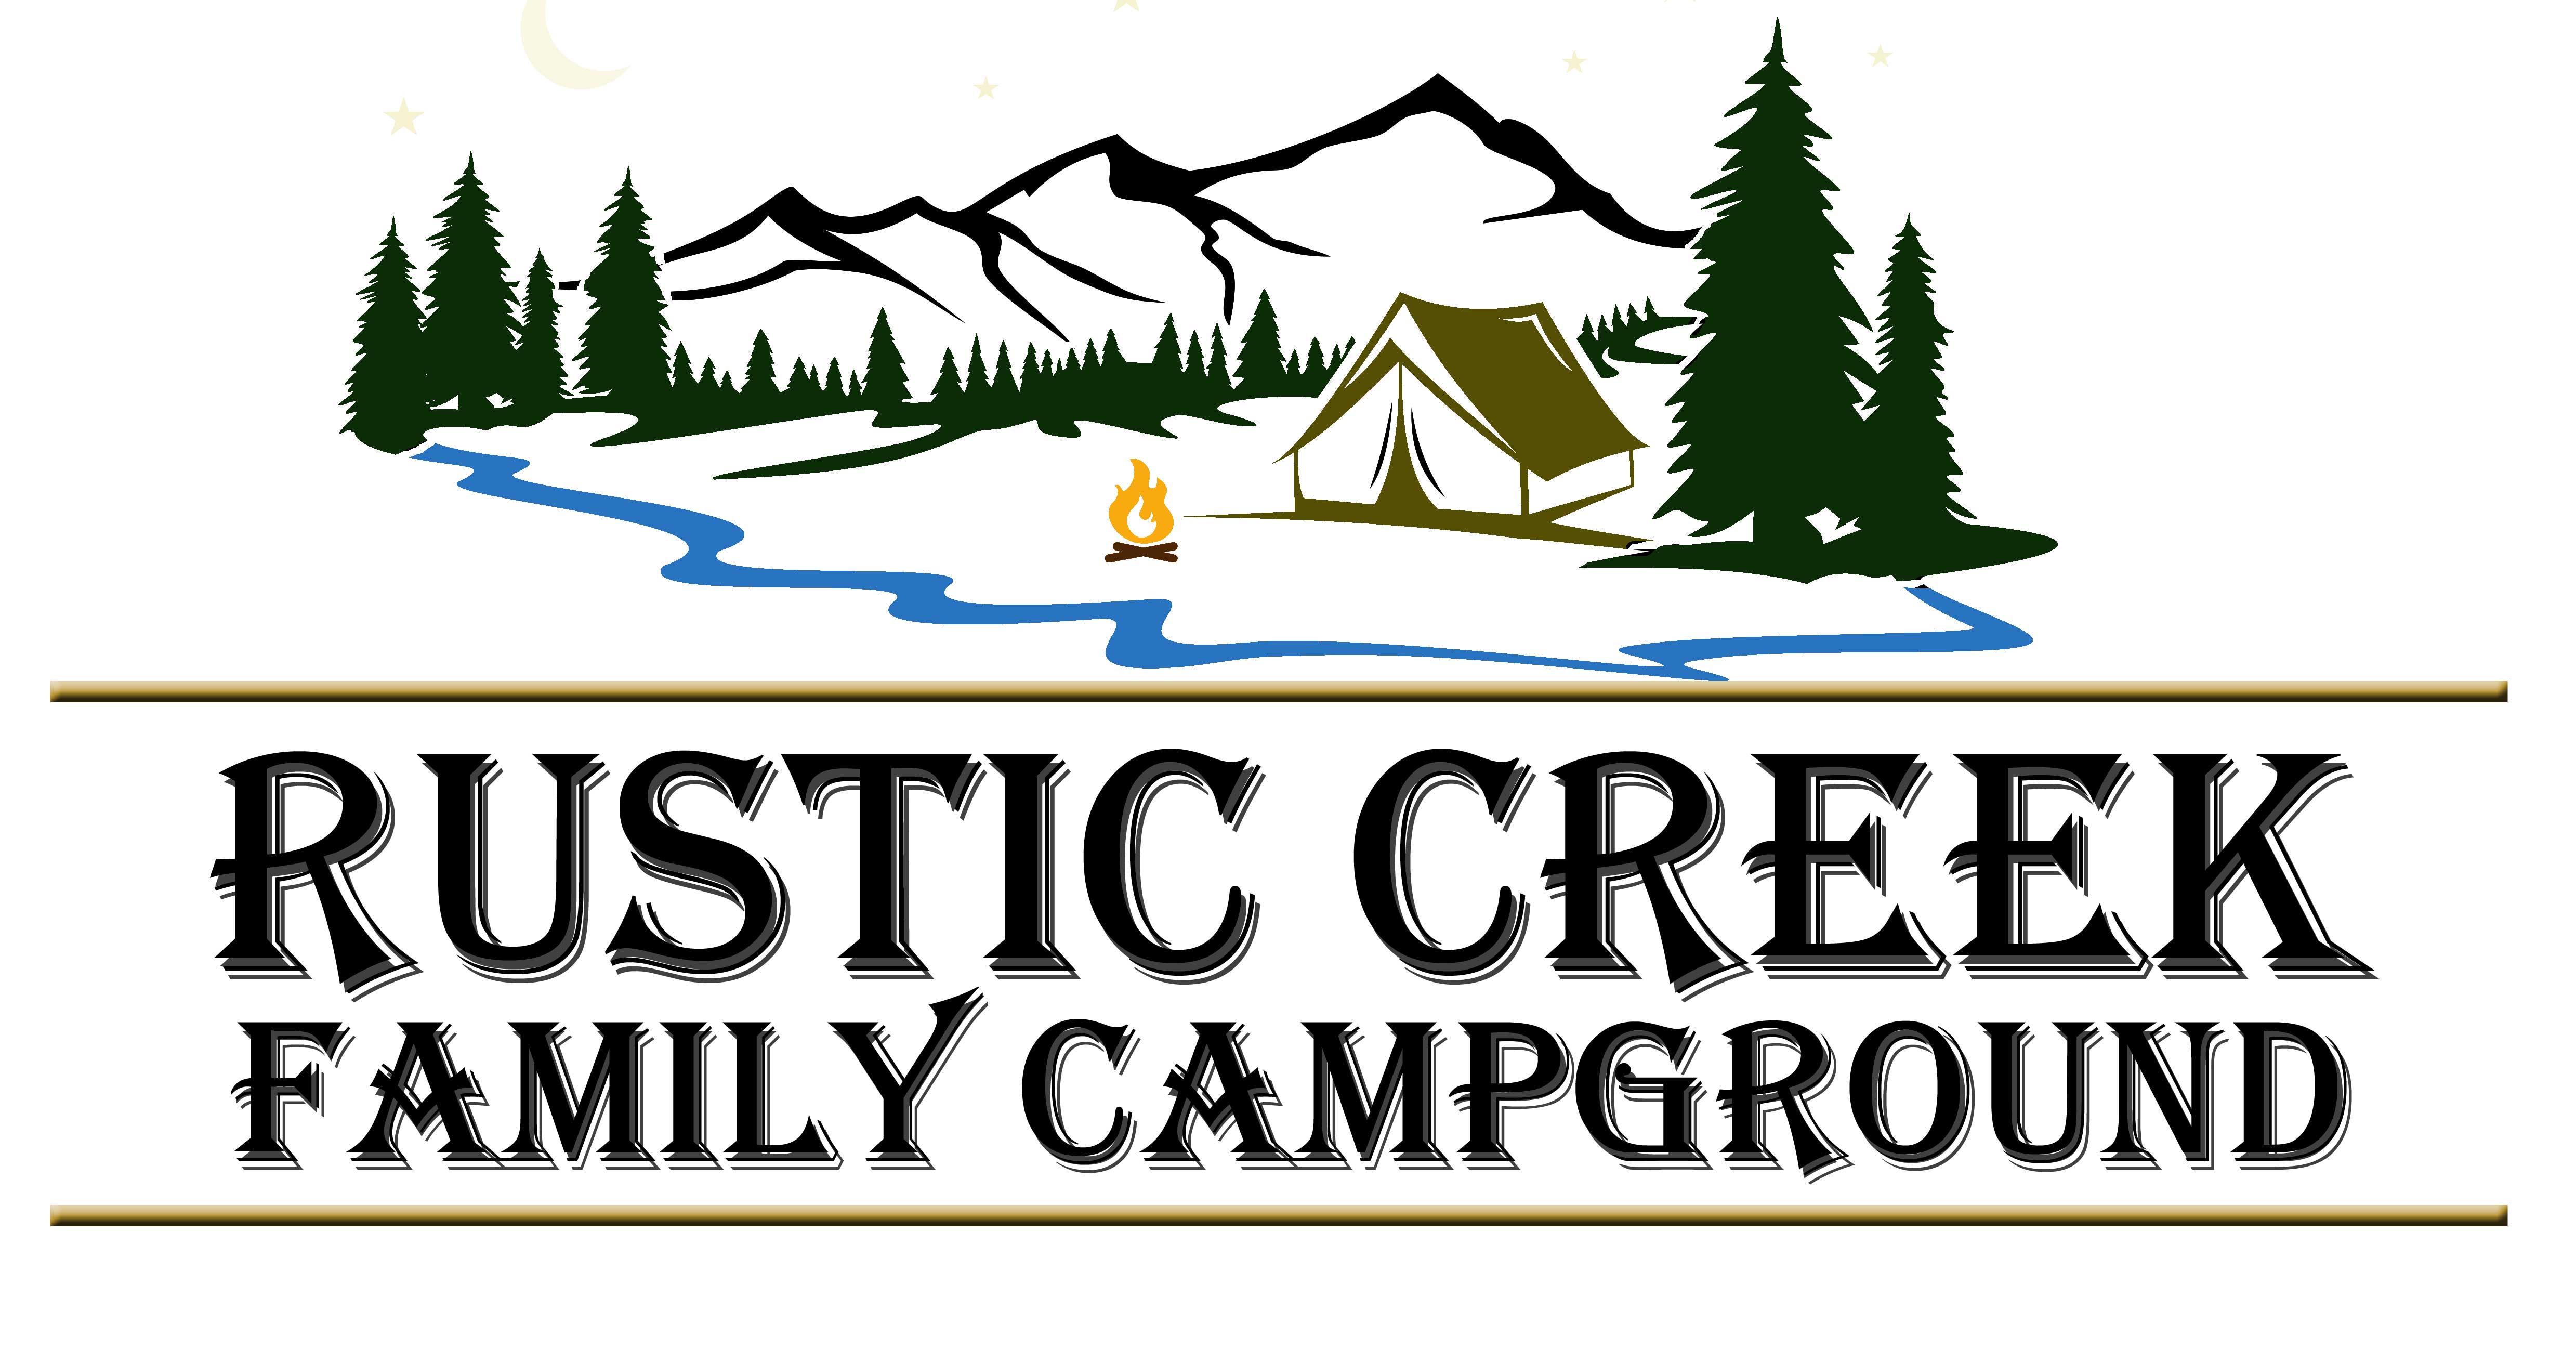 RUSTIC Creek Family Campground